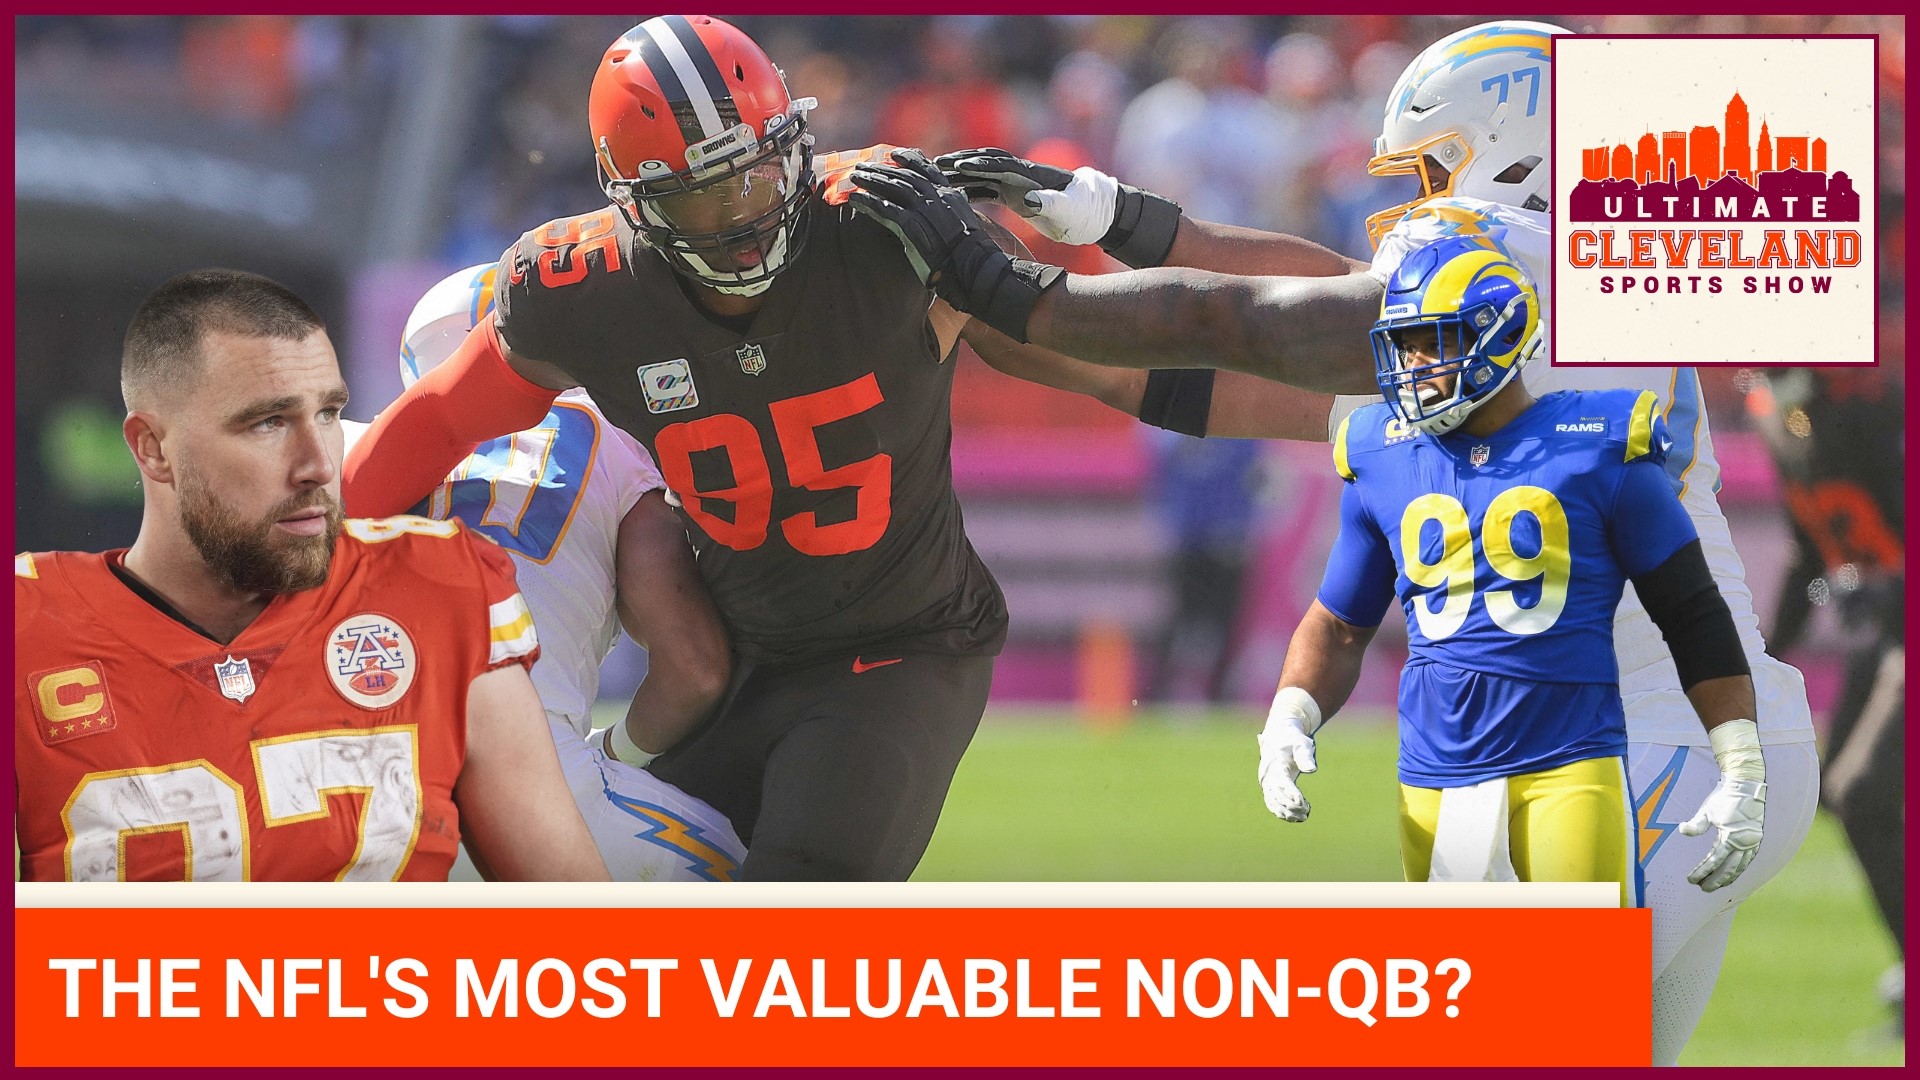 Who is the most valuable player in the NFL that is NOT a quarterback?